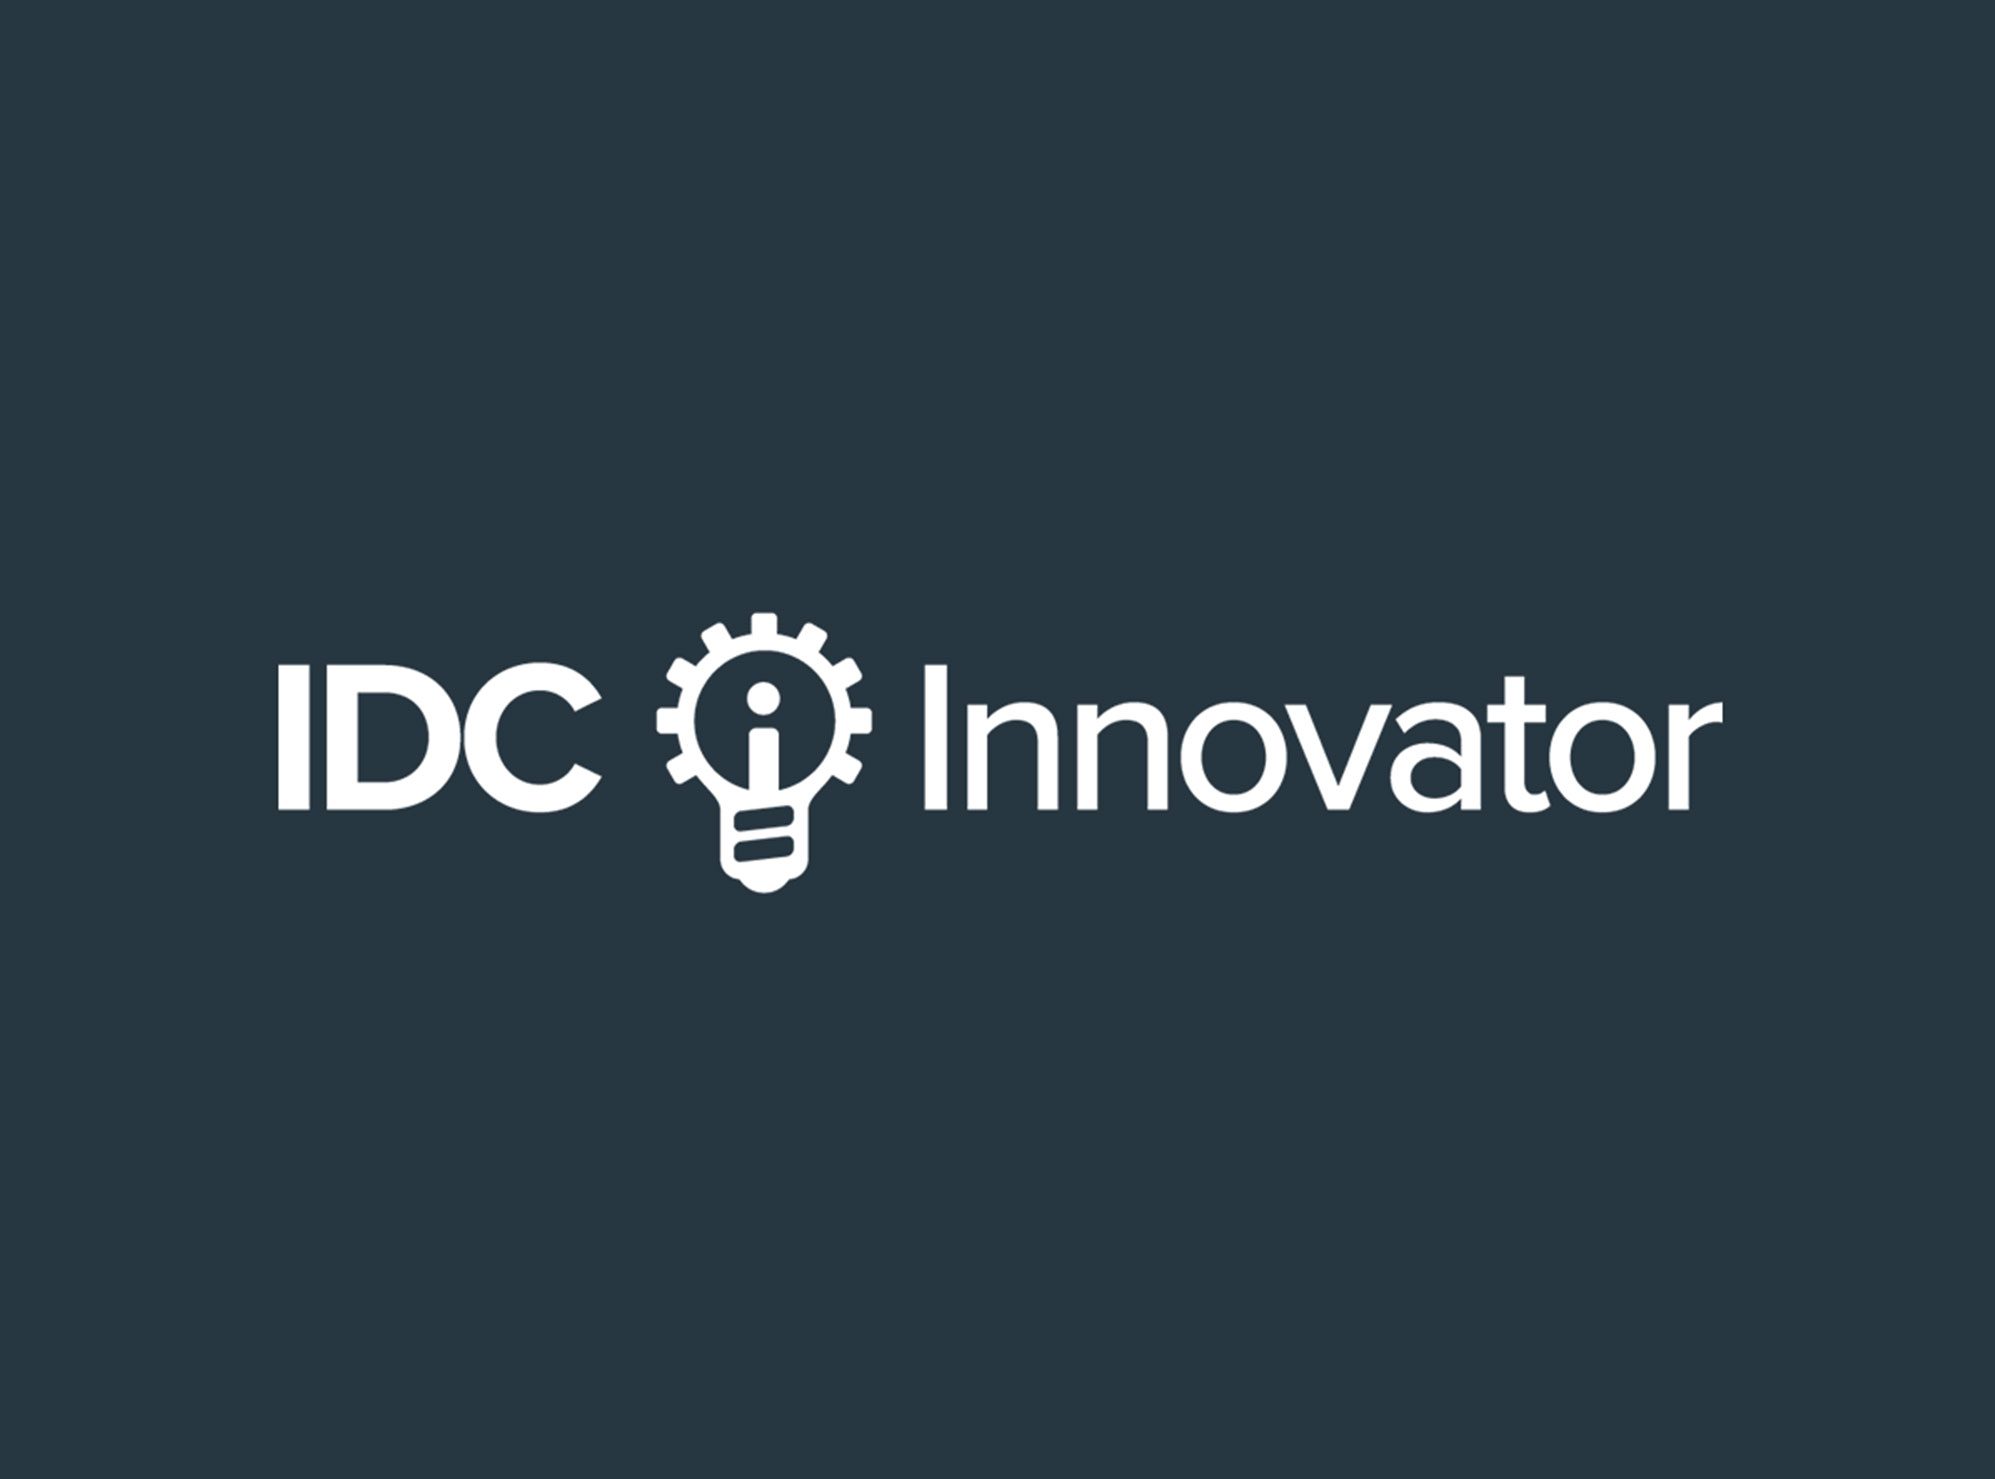 ROBOYO NAMED AN ‘IDC INNOVATOR’ IN INTELLIGENT AUTOMATION SERVICES